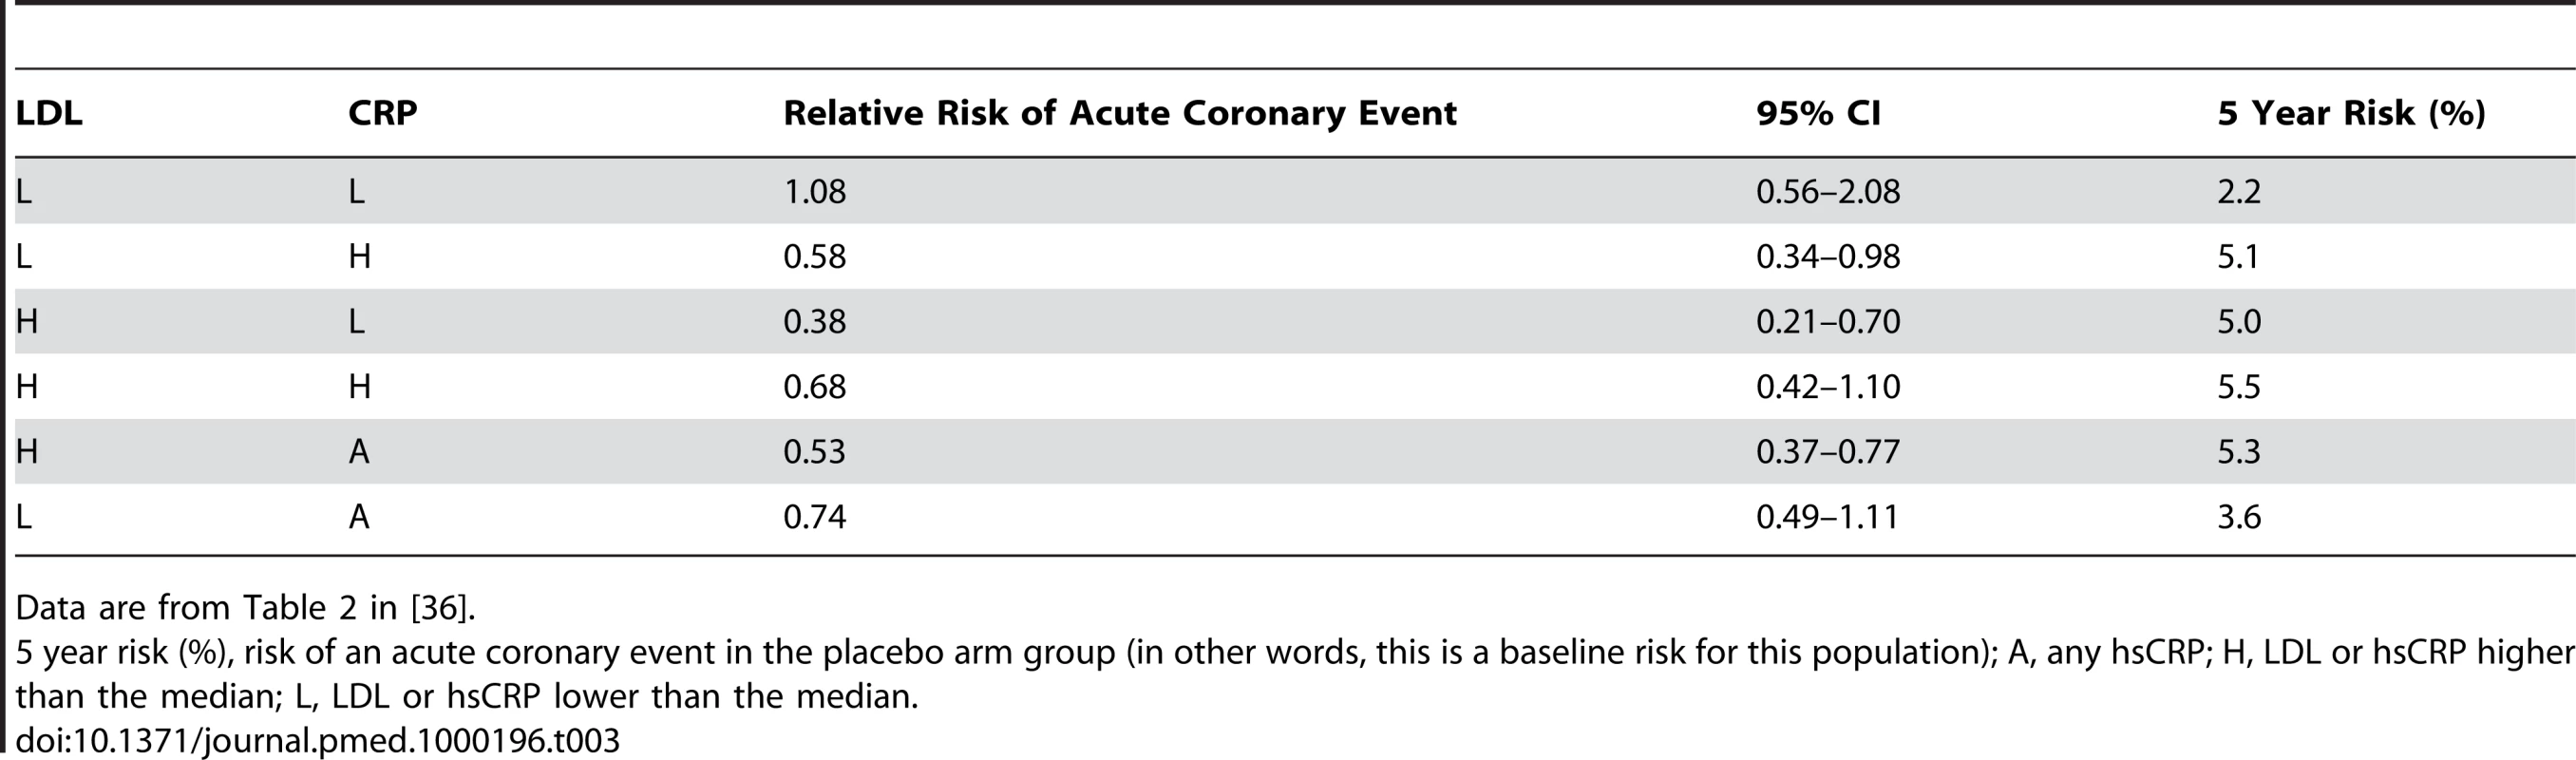 AFCAPS/TexCAPS acute coronary disease results - Relative risks (and 95% CIs) associated with lovastatin therapy, according to baseline lipid and C-reactive protein levels.